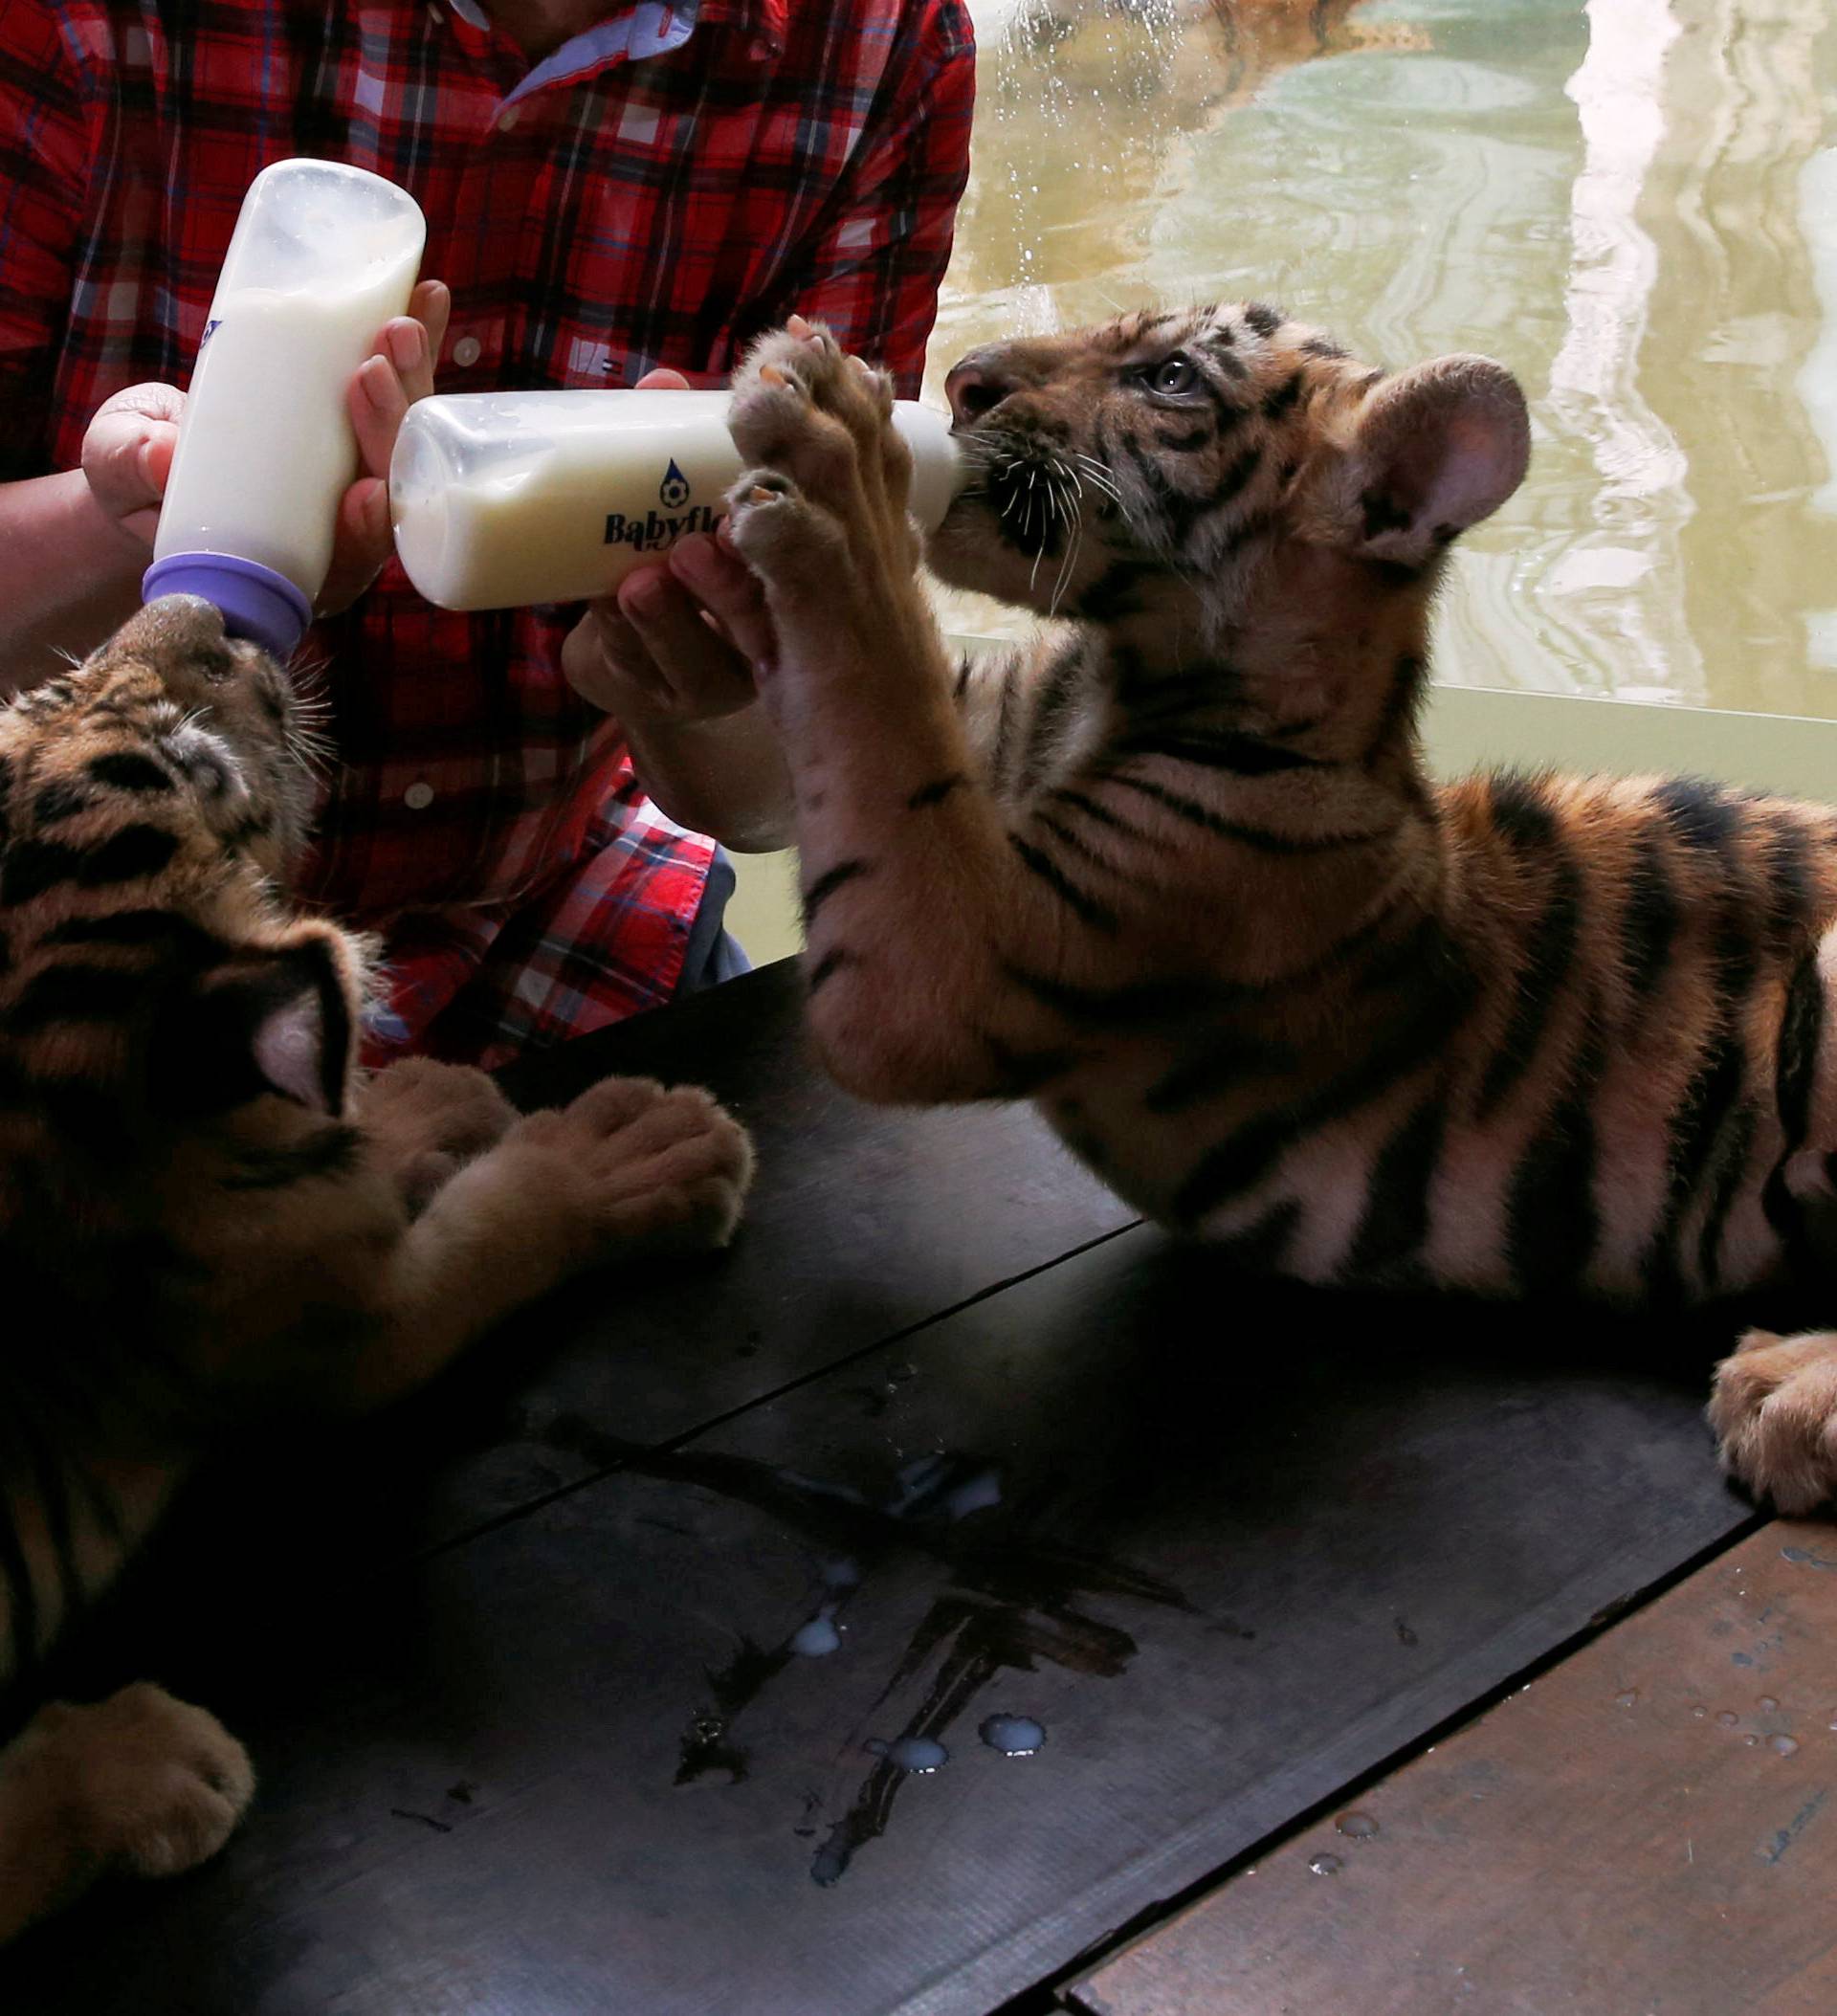 Bengal Tiger cubs which were named Duterte and Leni, referring to President Rodrigo Duterte and Vice-President Leni Robredo, by zoo owner Manny Tiangco drinks milk from bottles at Malabon Zoo in Malabon, Metro Manila